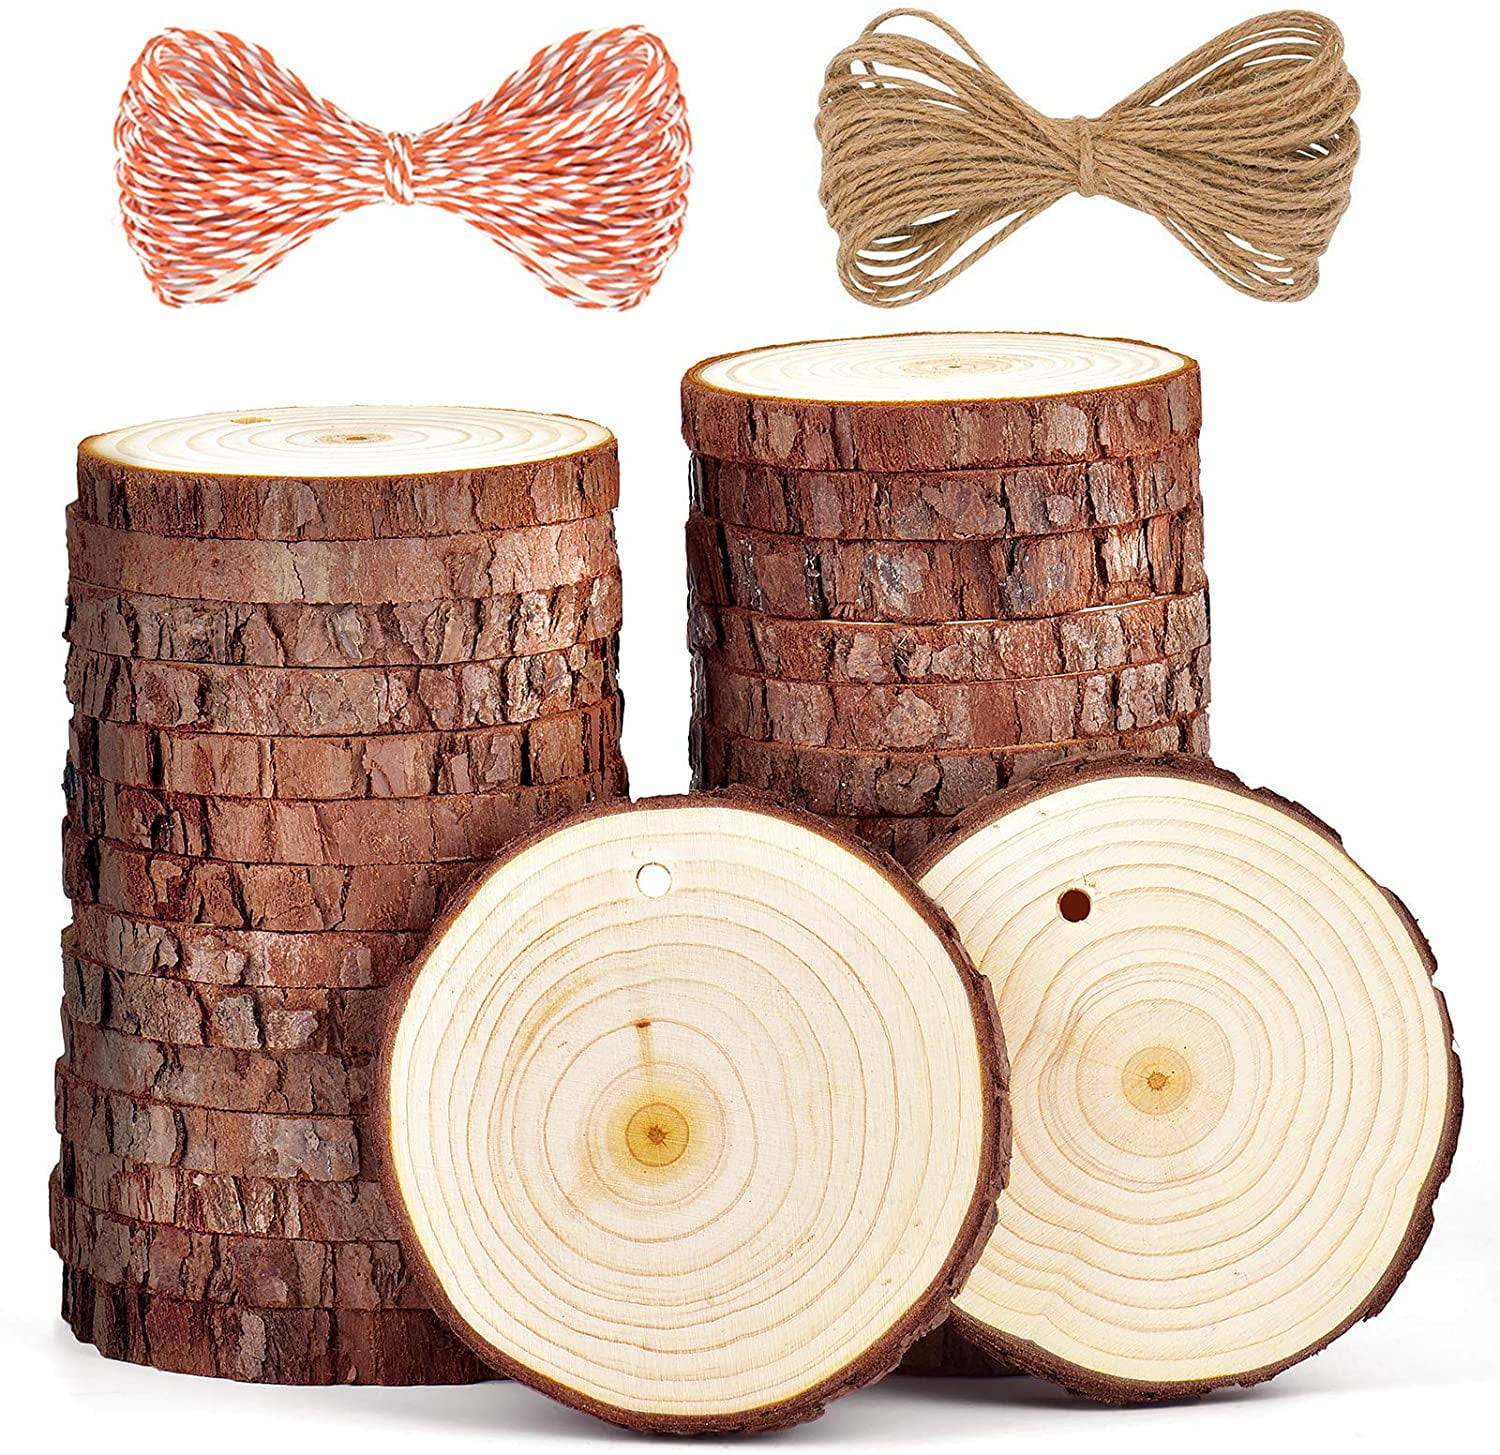 Pllieay 6Pcs 11-12 Inch Large Paulownia Wood Slices for Centerpieces, Round  Natural Wood Slices for Wedding Centerpiece, Table Centerpieces and Other